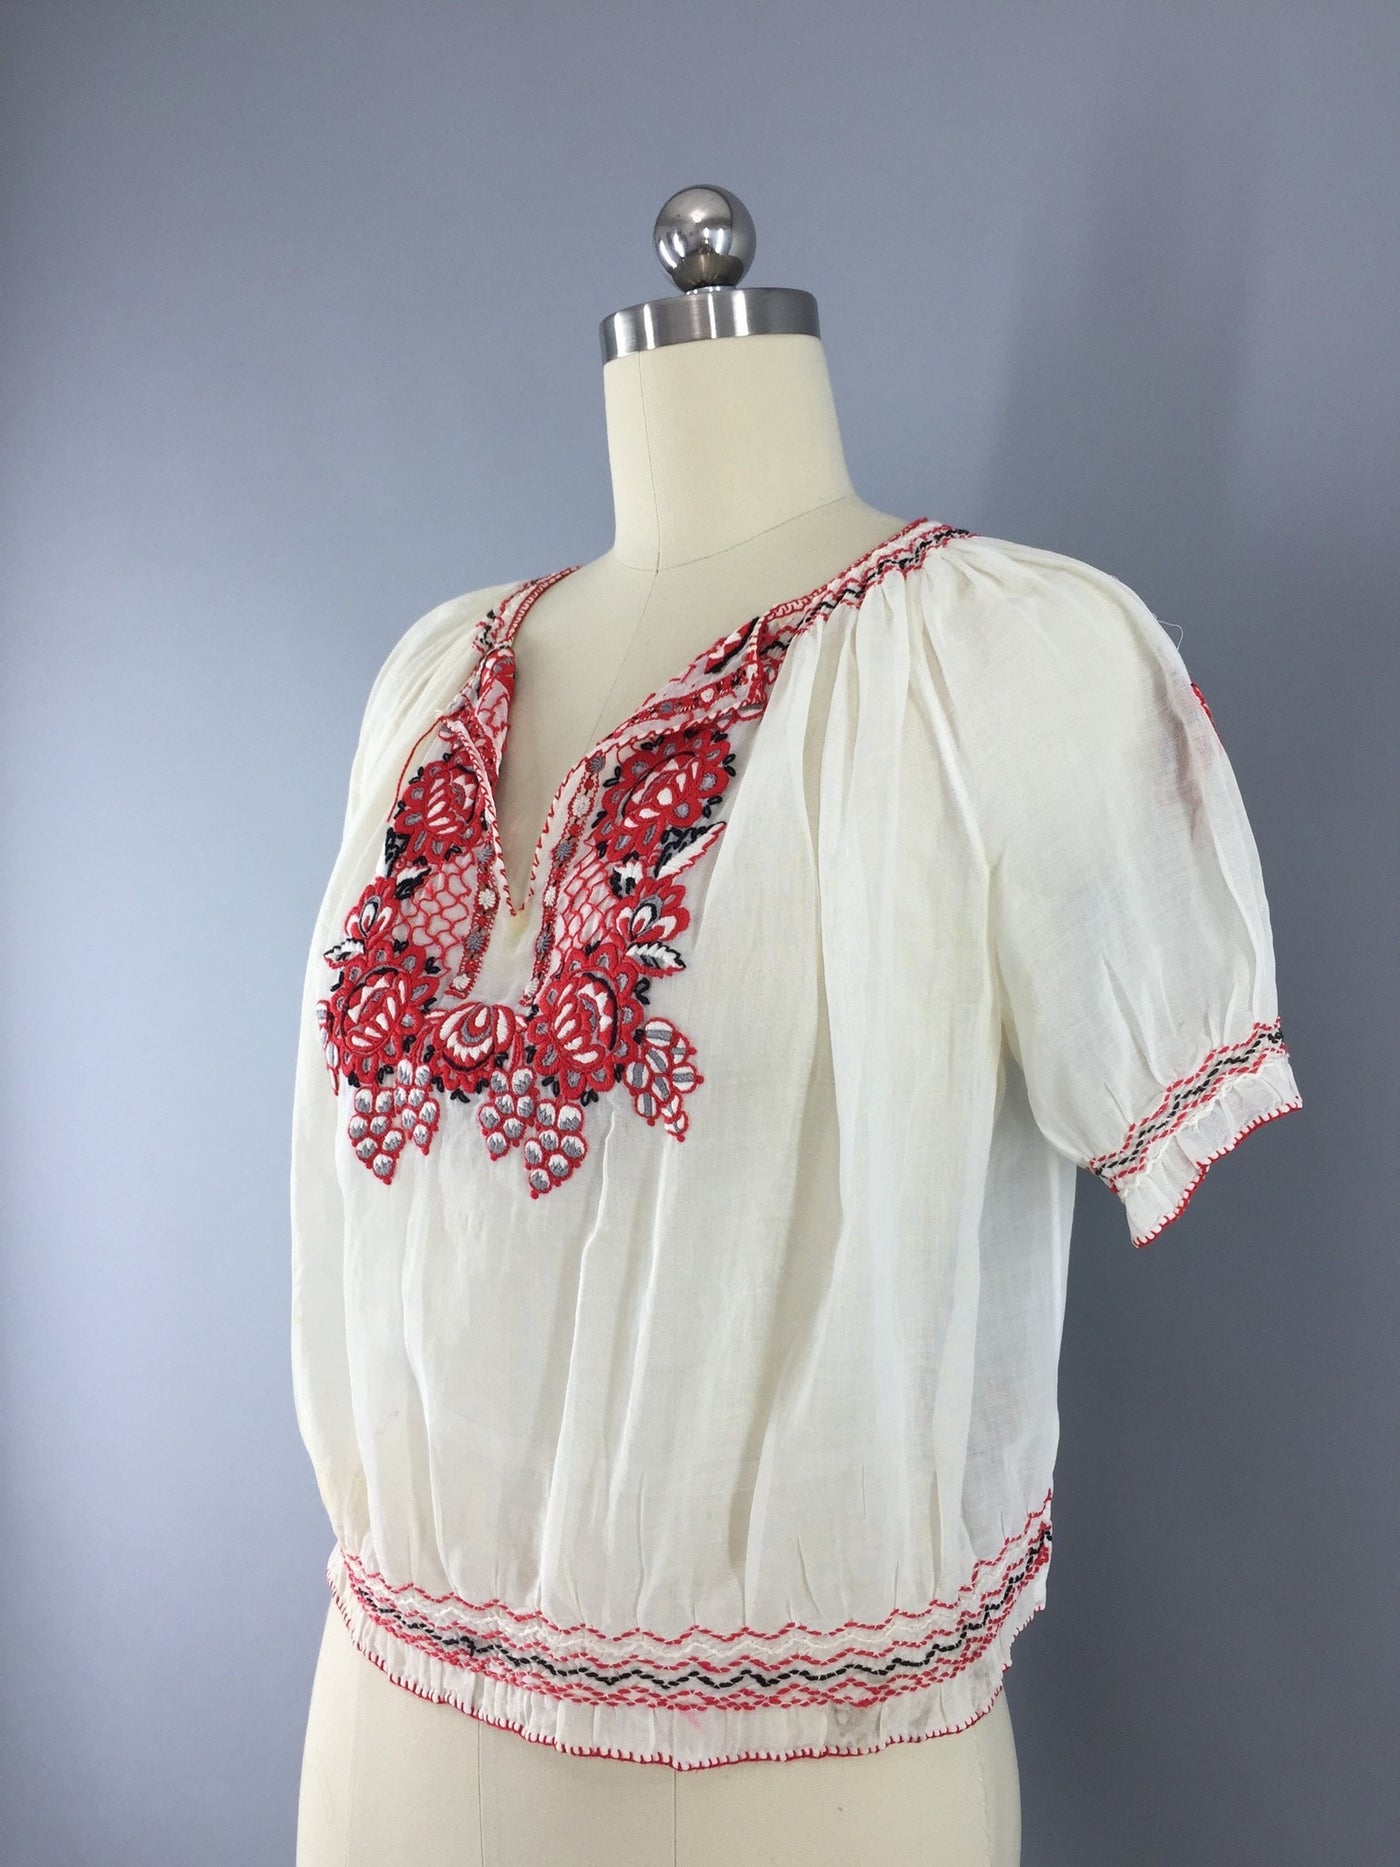 Vintage 1930s Peasant Blouse / Hungarian Embroidered - ThisBlueBird